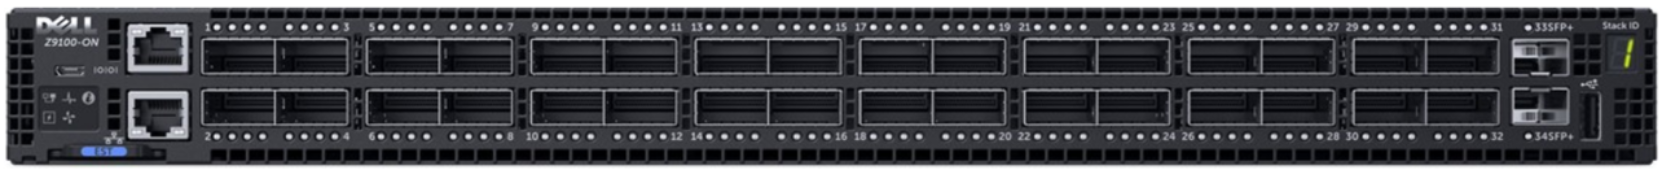 Front view of a Dell Z9100-ON network switch